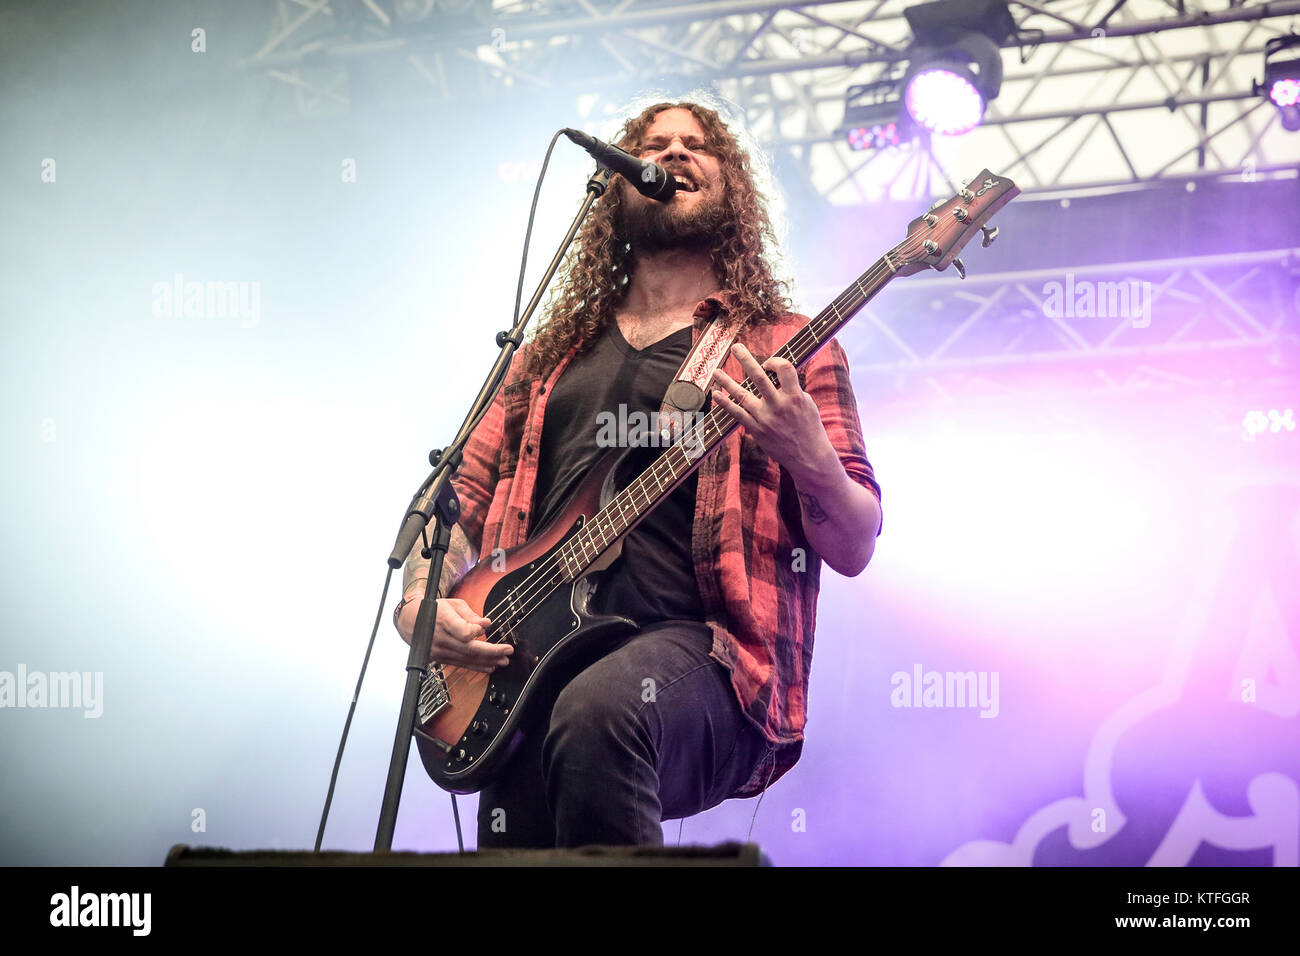 The Canadian hard rock band Monster Truck performs a live concert at the  Swedish music festival Sweden Rock Festival 2016. Here vocalist and bass  player Jon Harvey is seen live on stage.